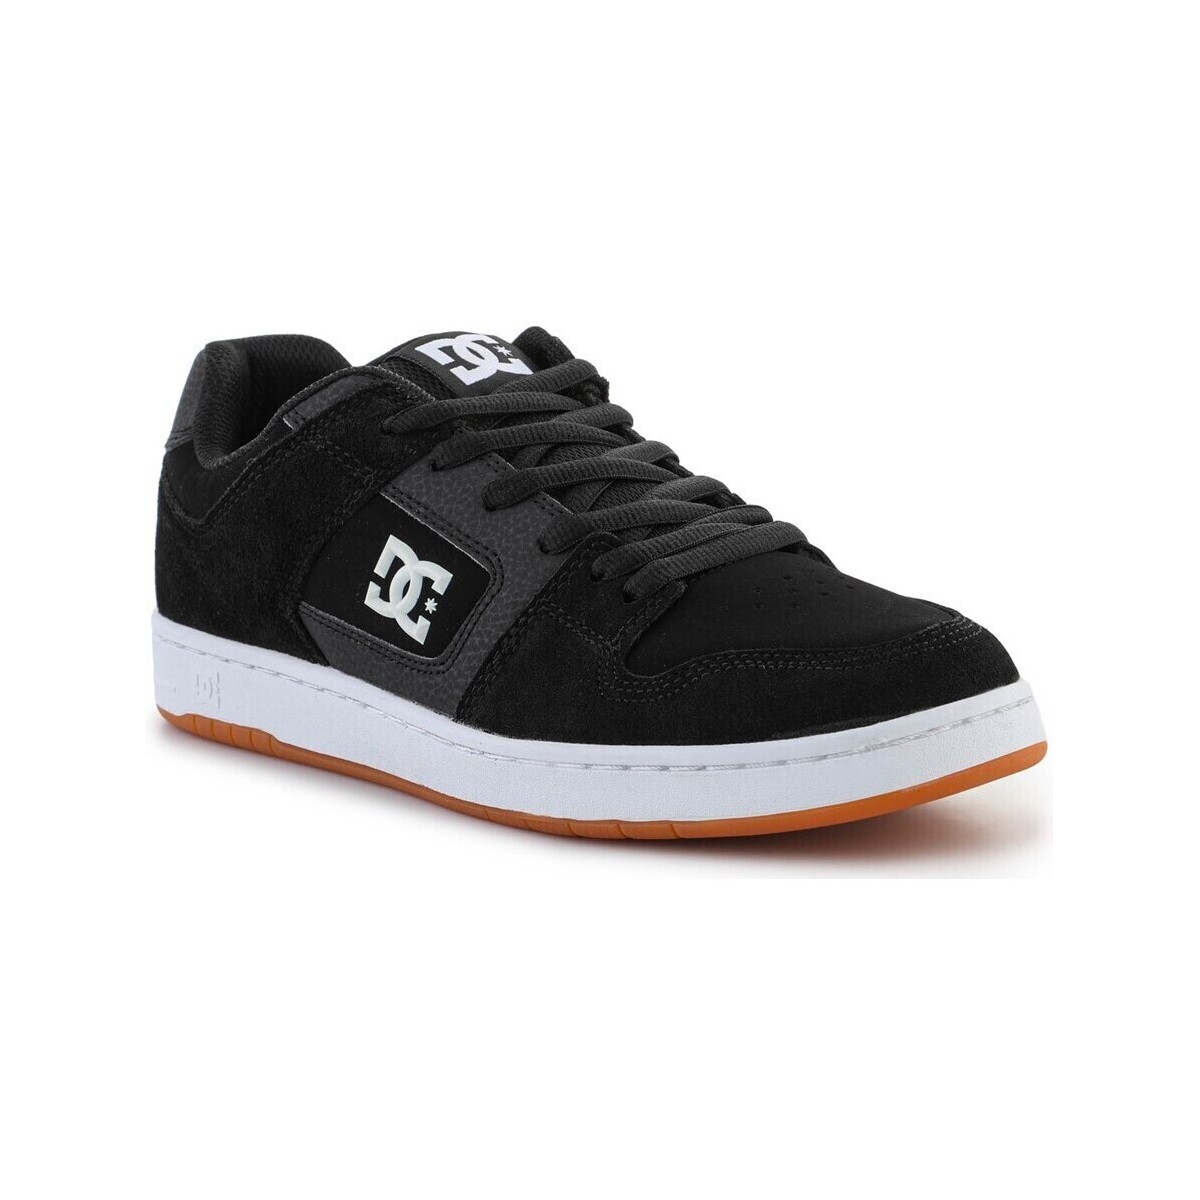 dc shoes  manteca 4  men's skate shoes (trainers) in black